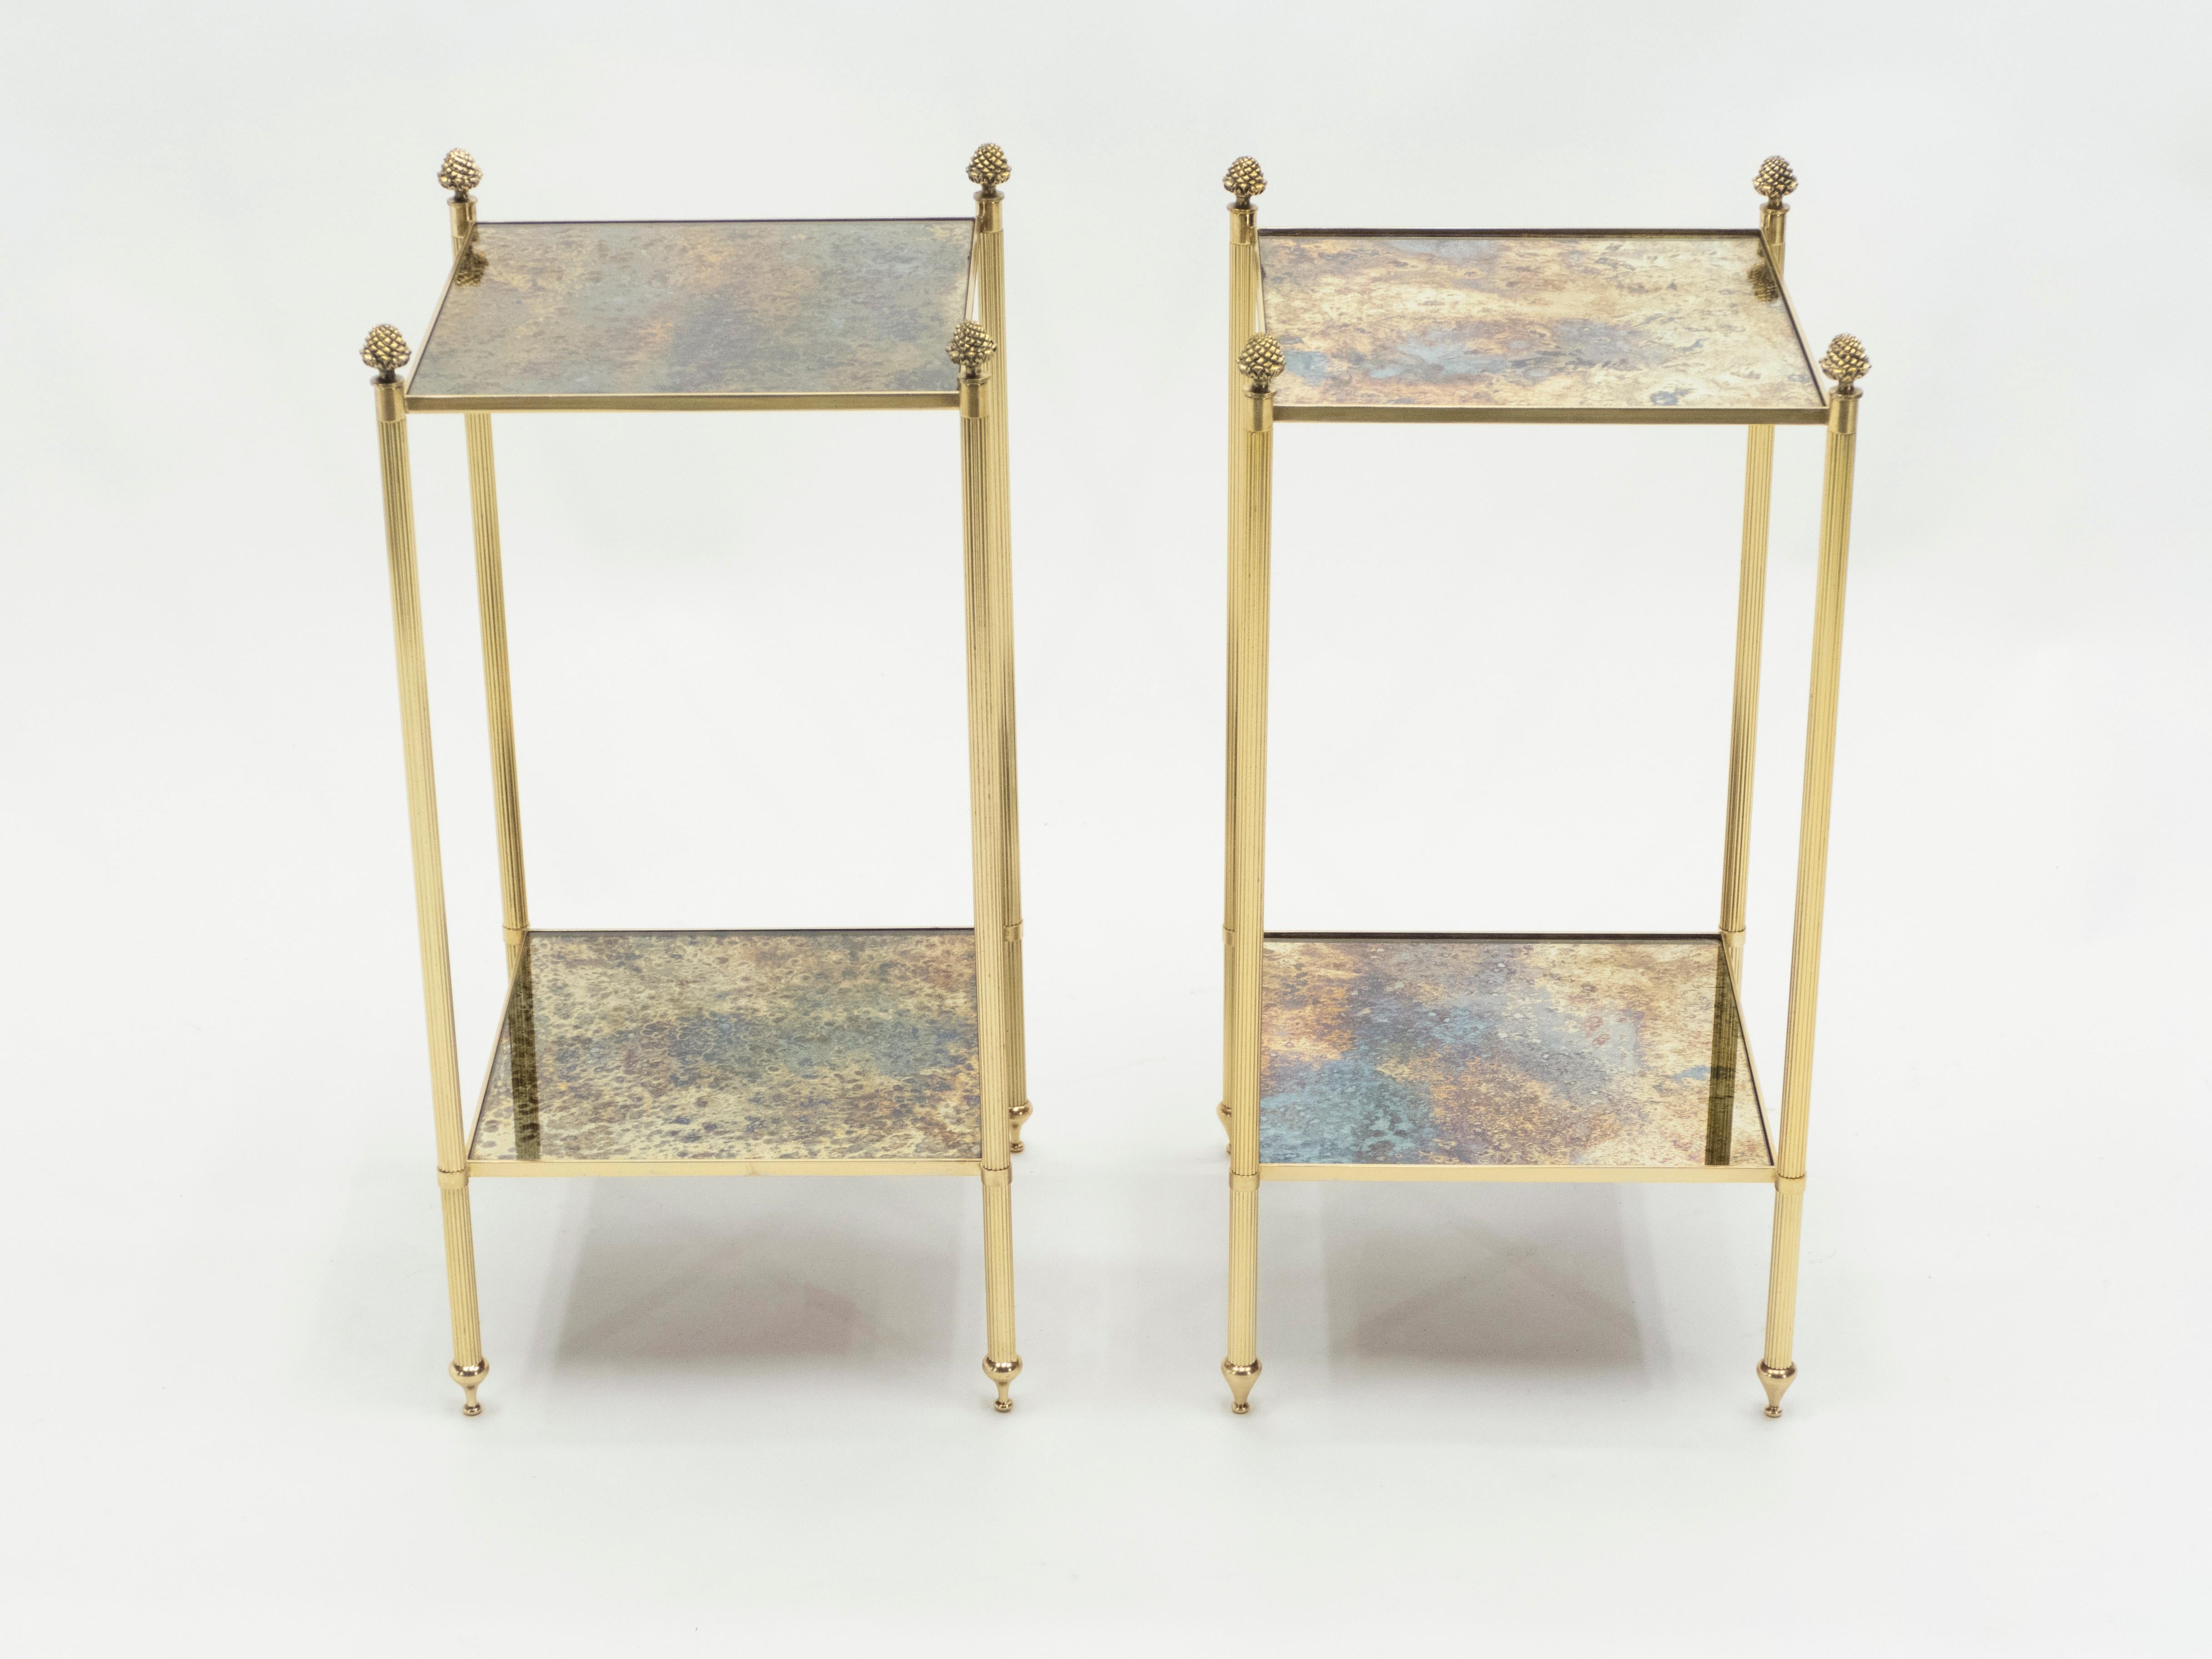 This pair of two-tier end tables by French design house Maison Jansen was created with solid brass, typical French neoclassical pine cone, and beautiful old patina mirror circa 1960. The two-tier mirrors are timeless and smooth, while the brass feet